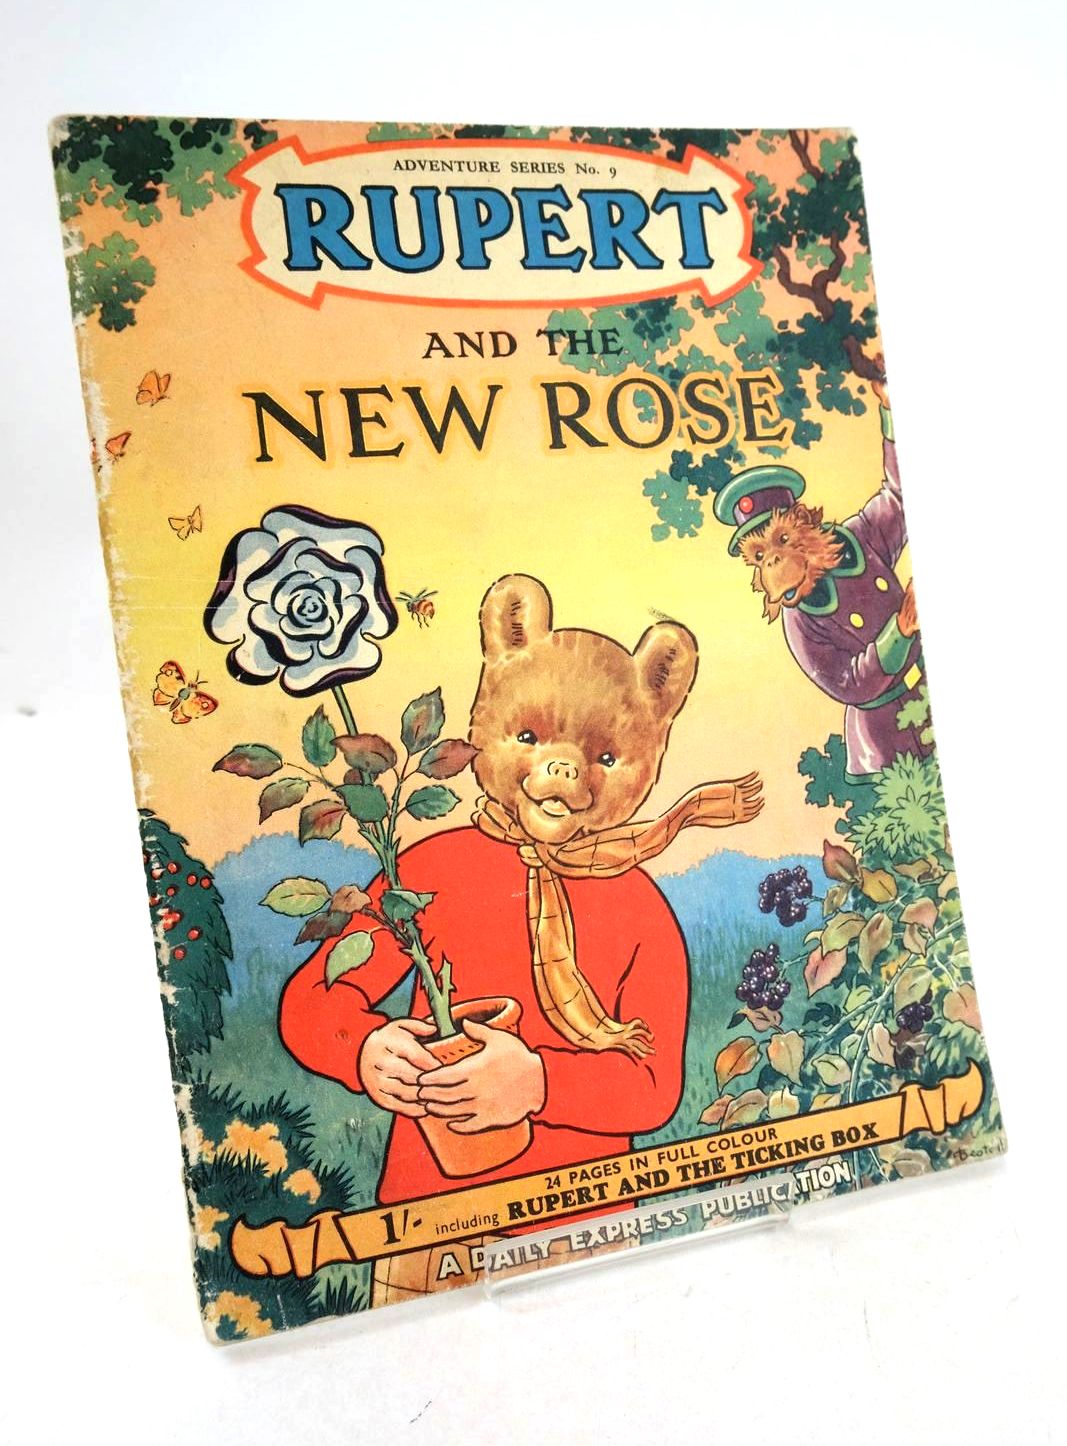 Photo of RUPERT ADVENTURE SERIES No. 9 - RUPERT AND THE NEW ROSE written by Bestall, Alfred illustrated by Bestall, Alfred published by Daily Express (STOCK CODE: 1326718)  for sale by Stella & Rose's Books